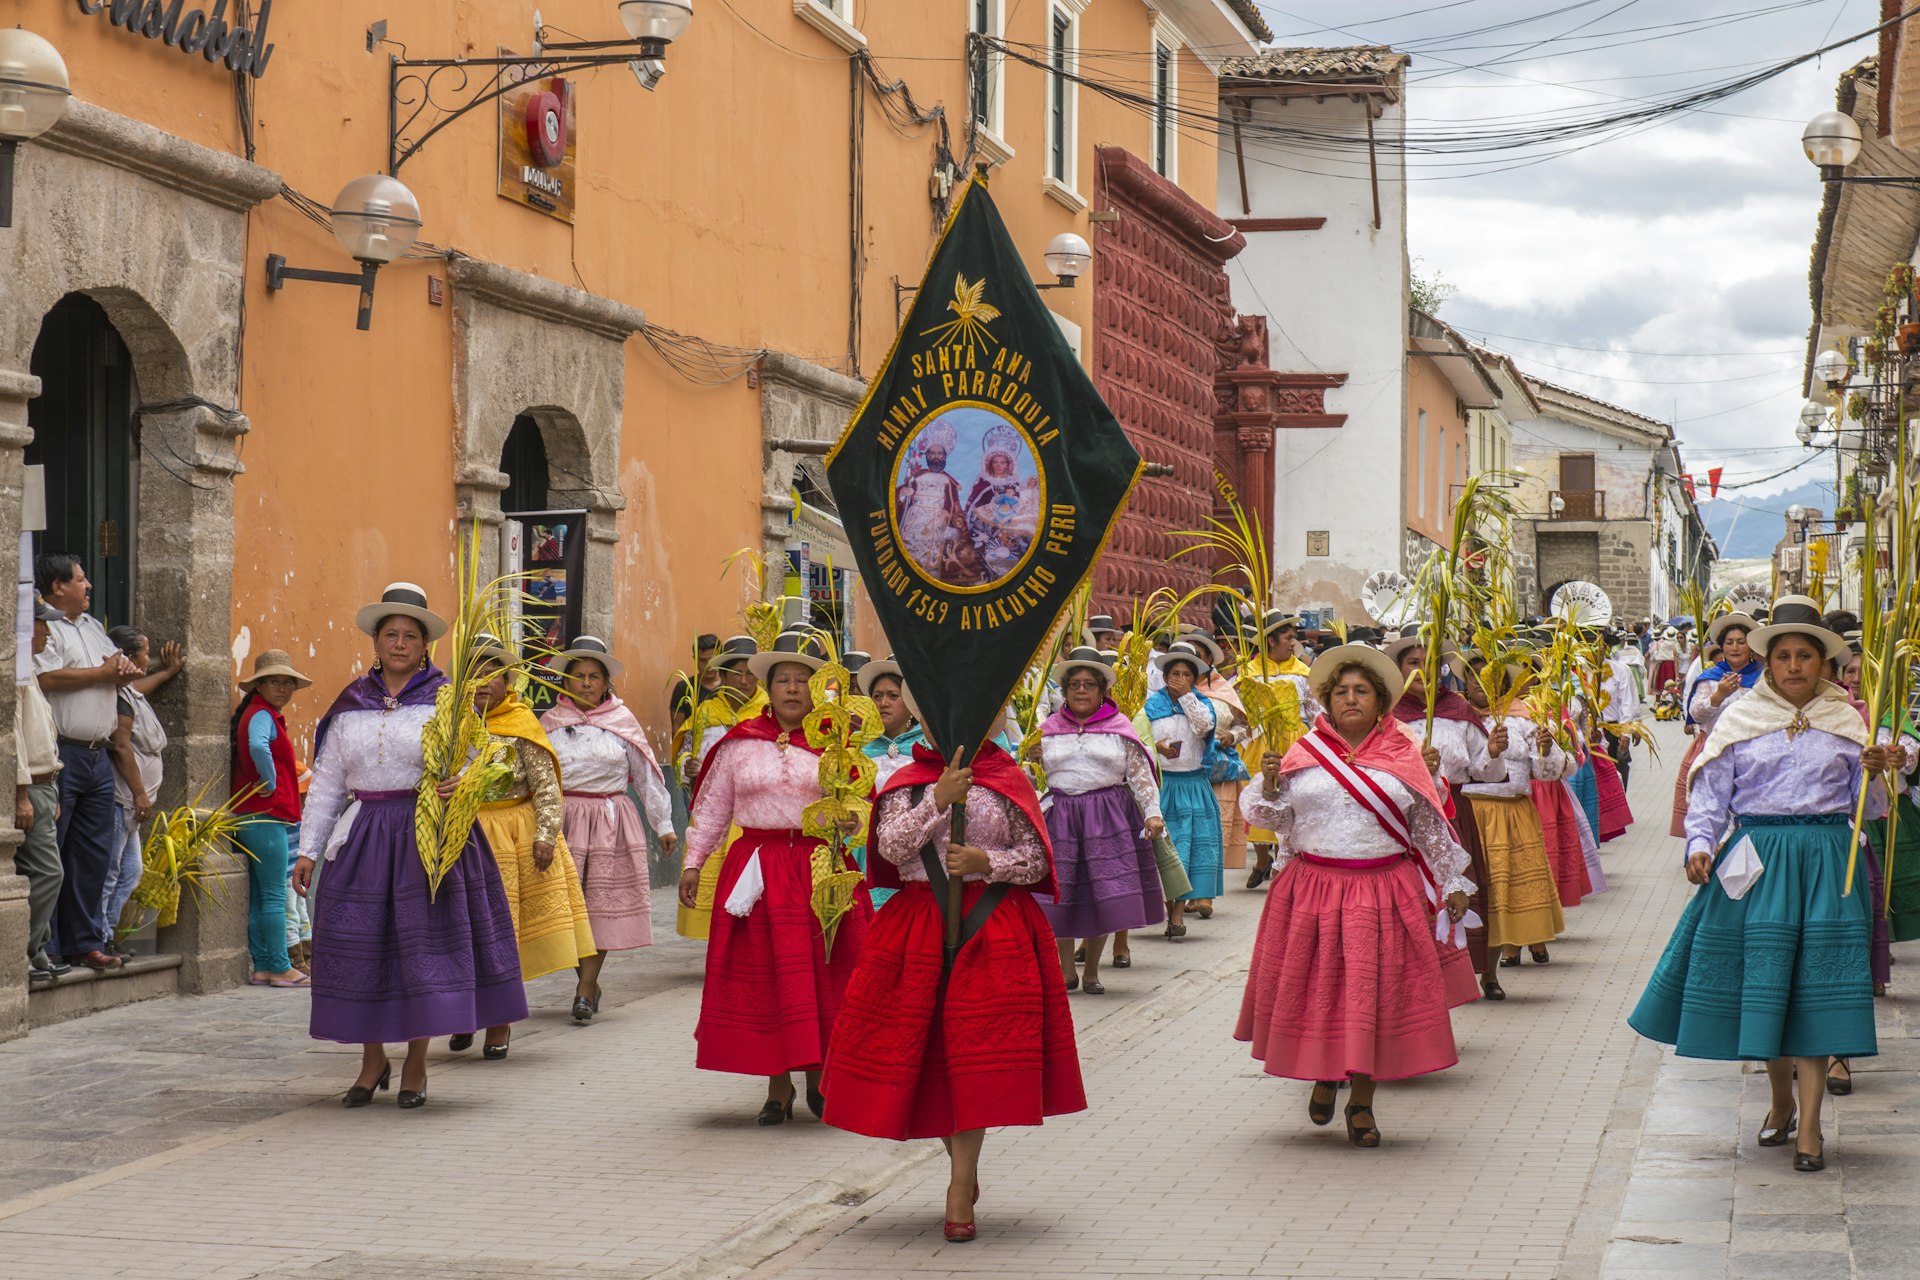 People with multicolored dresses and hats marching during the celebration of the Palm Sunday of Easter at Ayacucho city, Peru